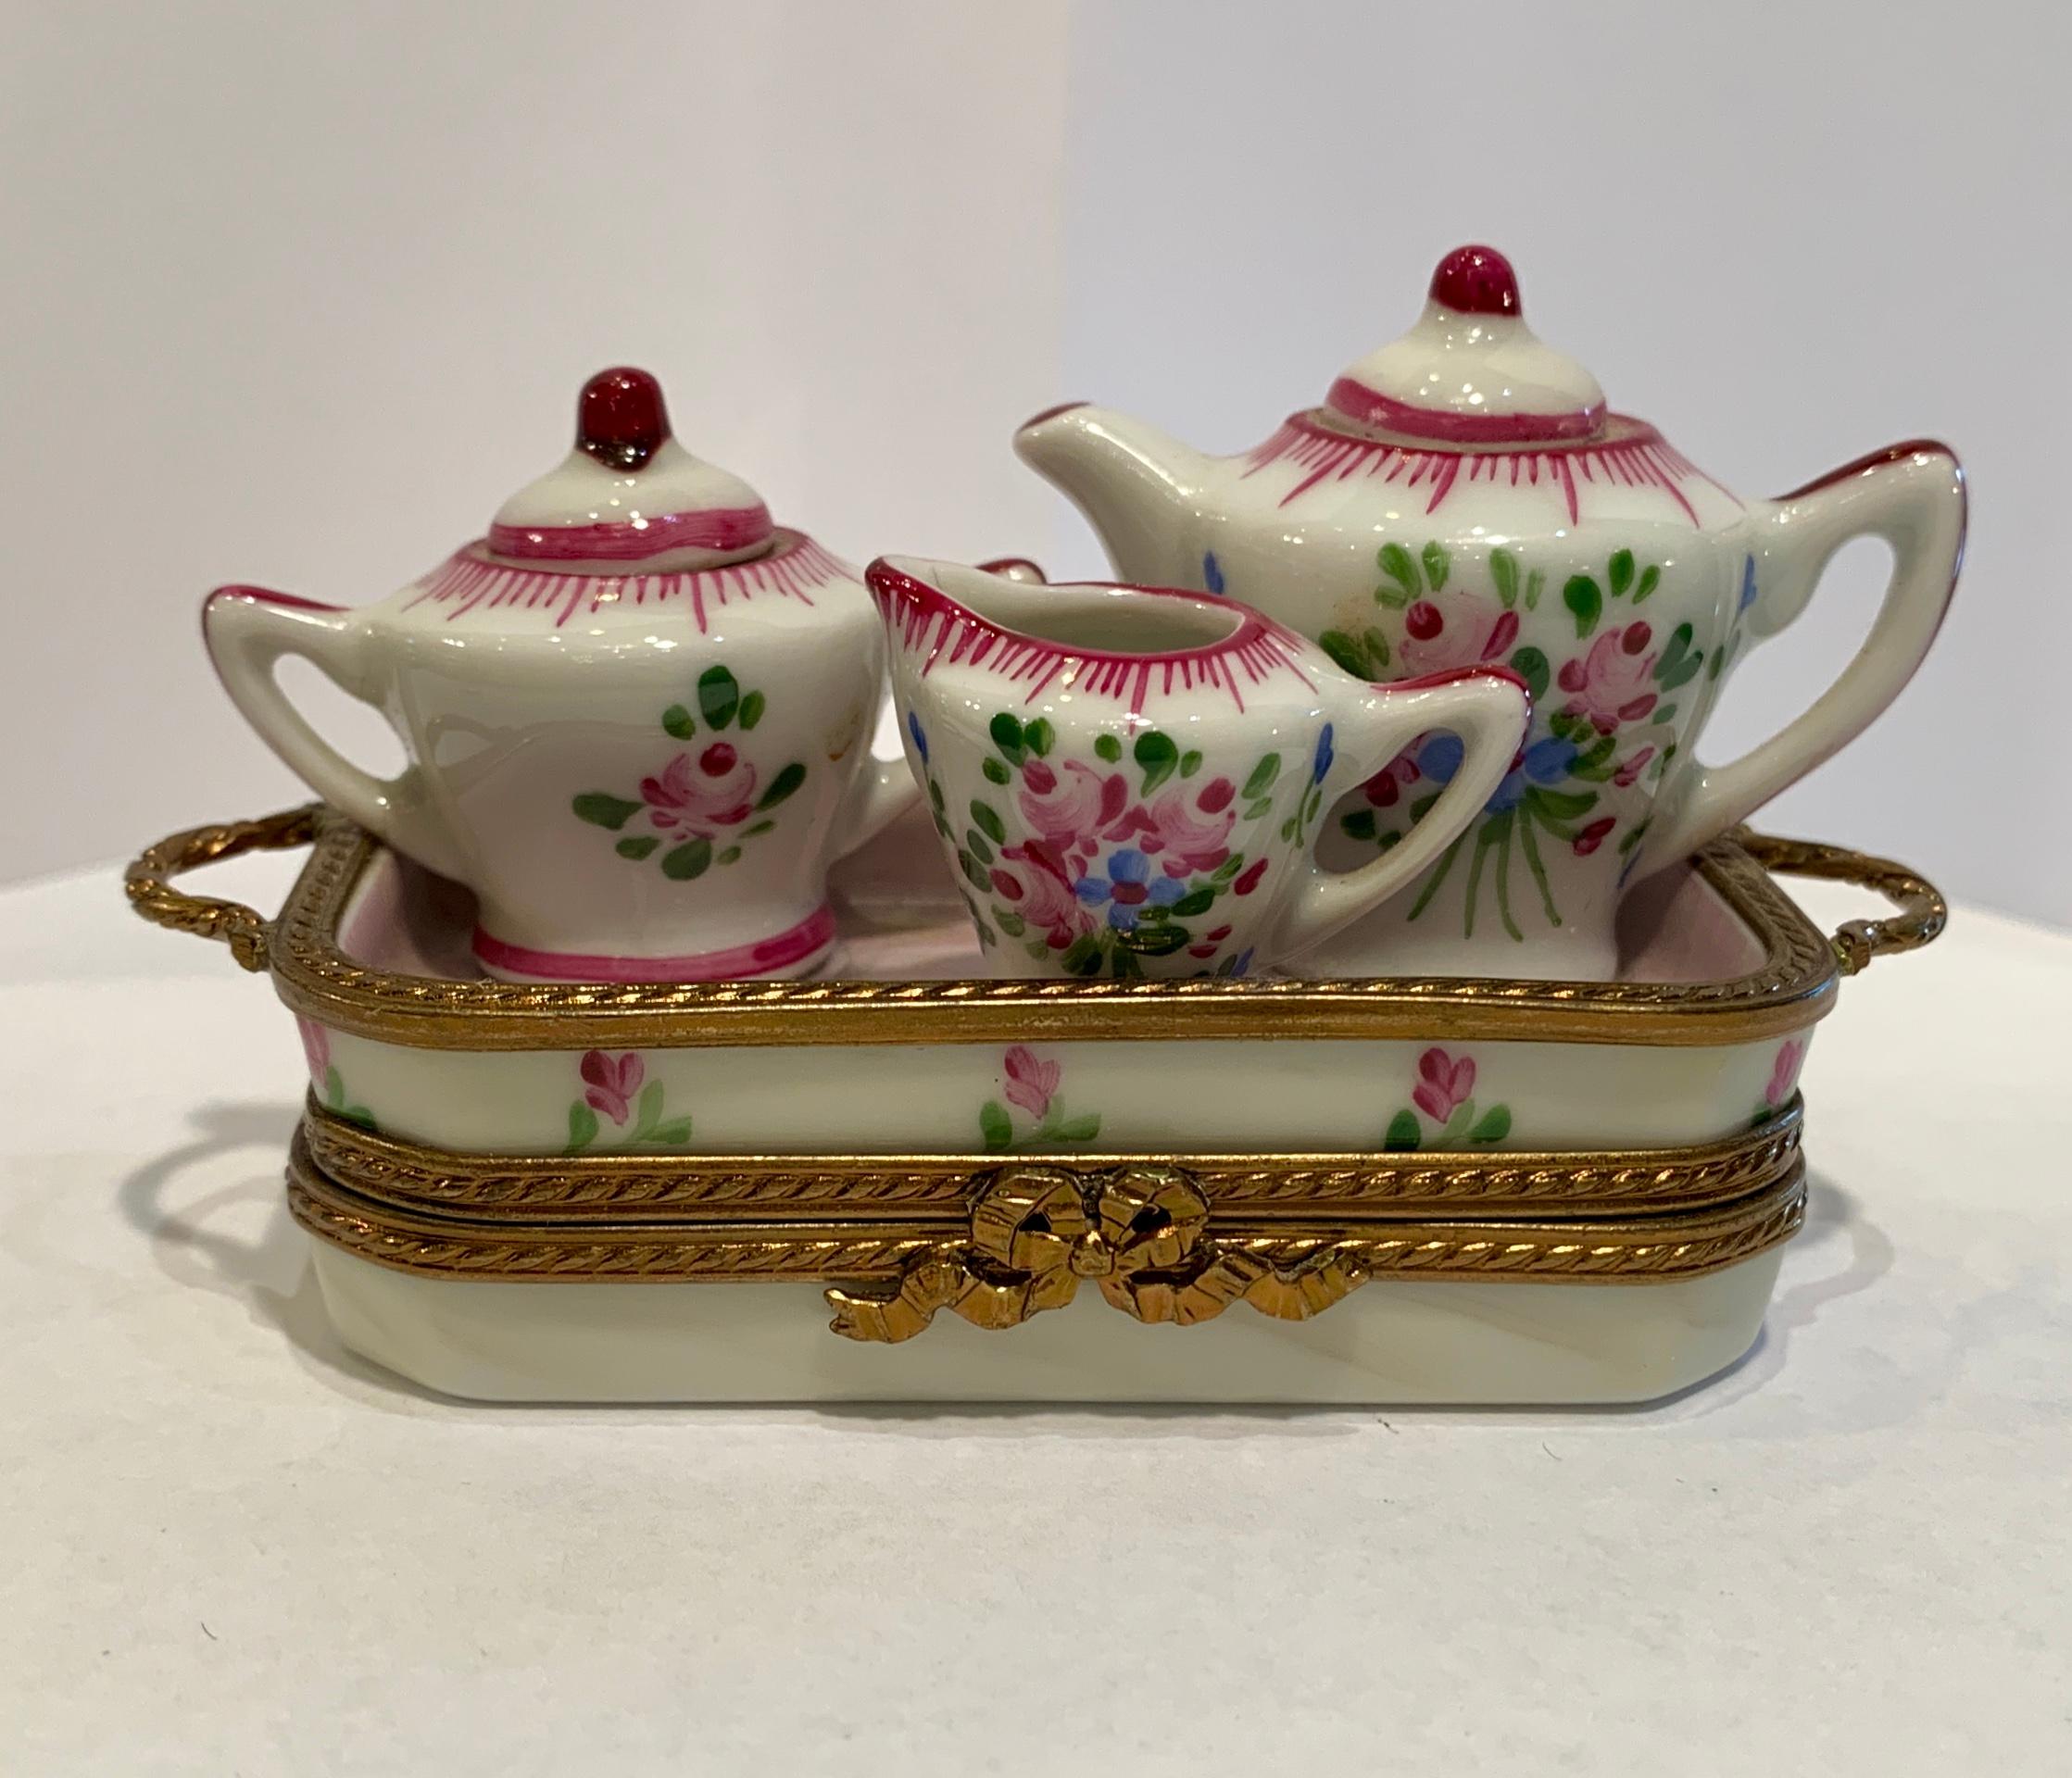 Very unusual, tiny Limoges porcelain miniature tea set is handmade and hand painted with a rose motif. Afixed tea set includes a teapot, lidded sugar bowl and creamer arranged on a beautiful serving tray. Tray opens to reveal a pair of afixed